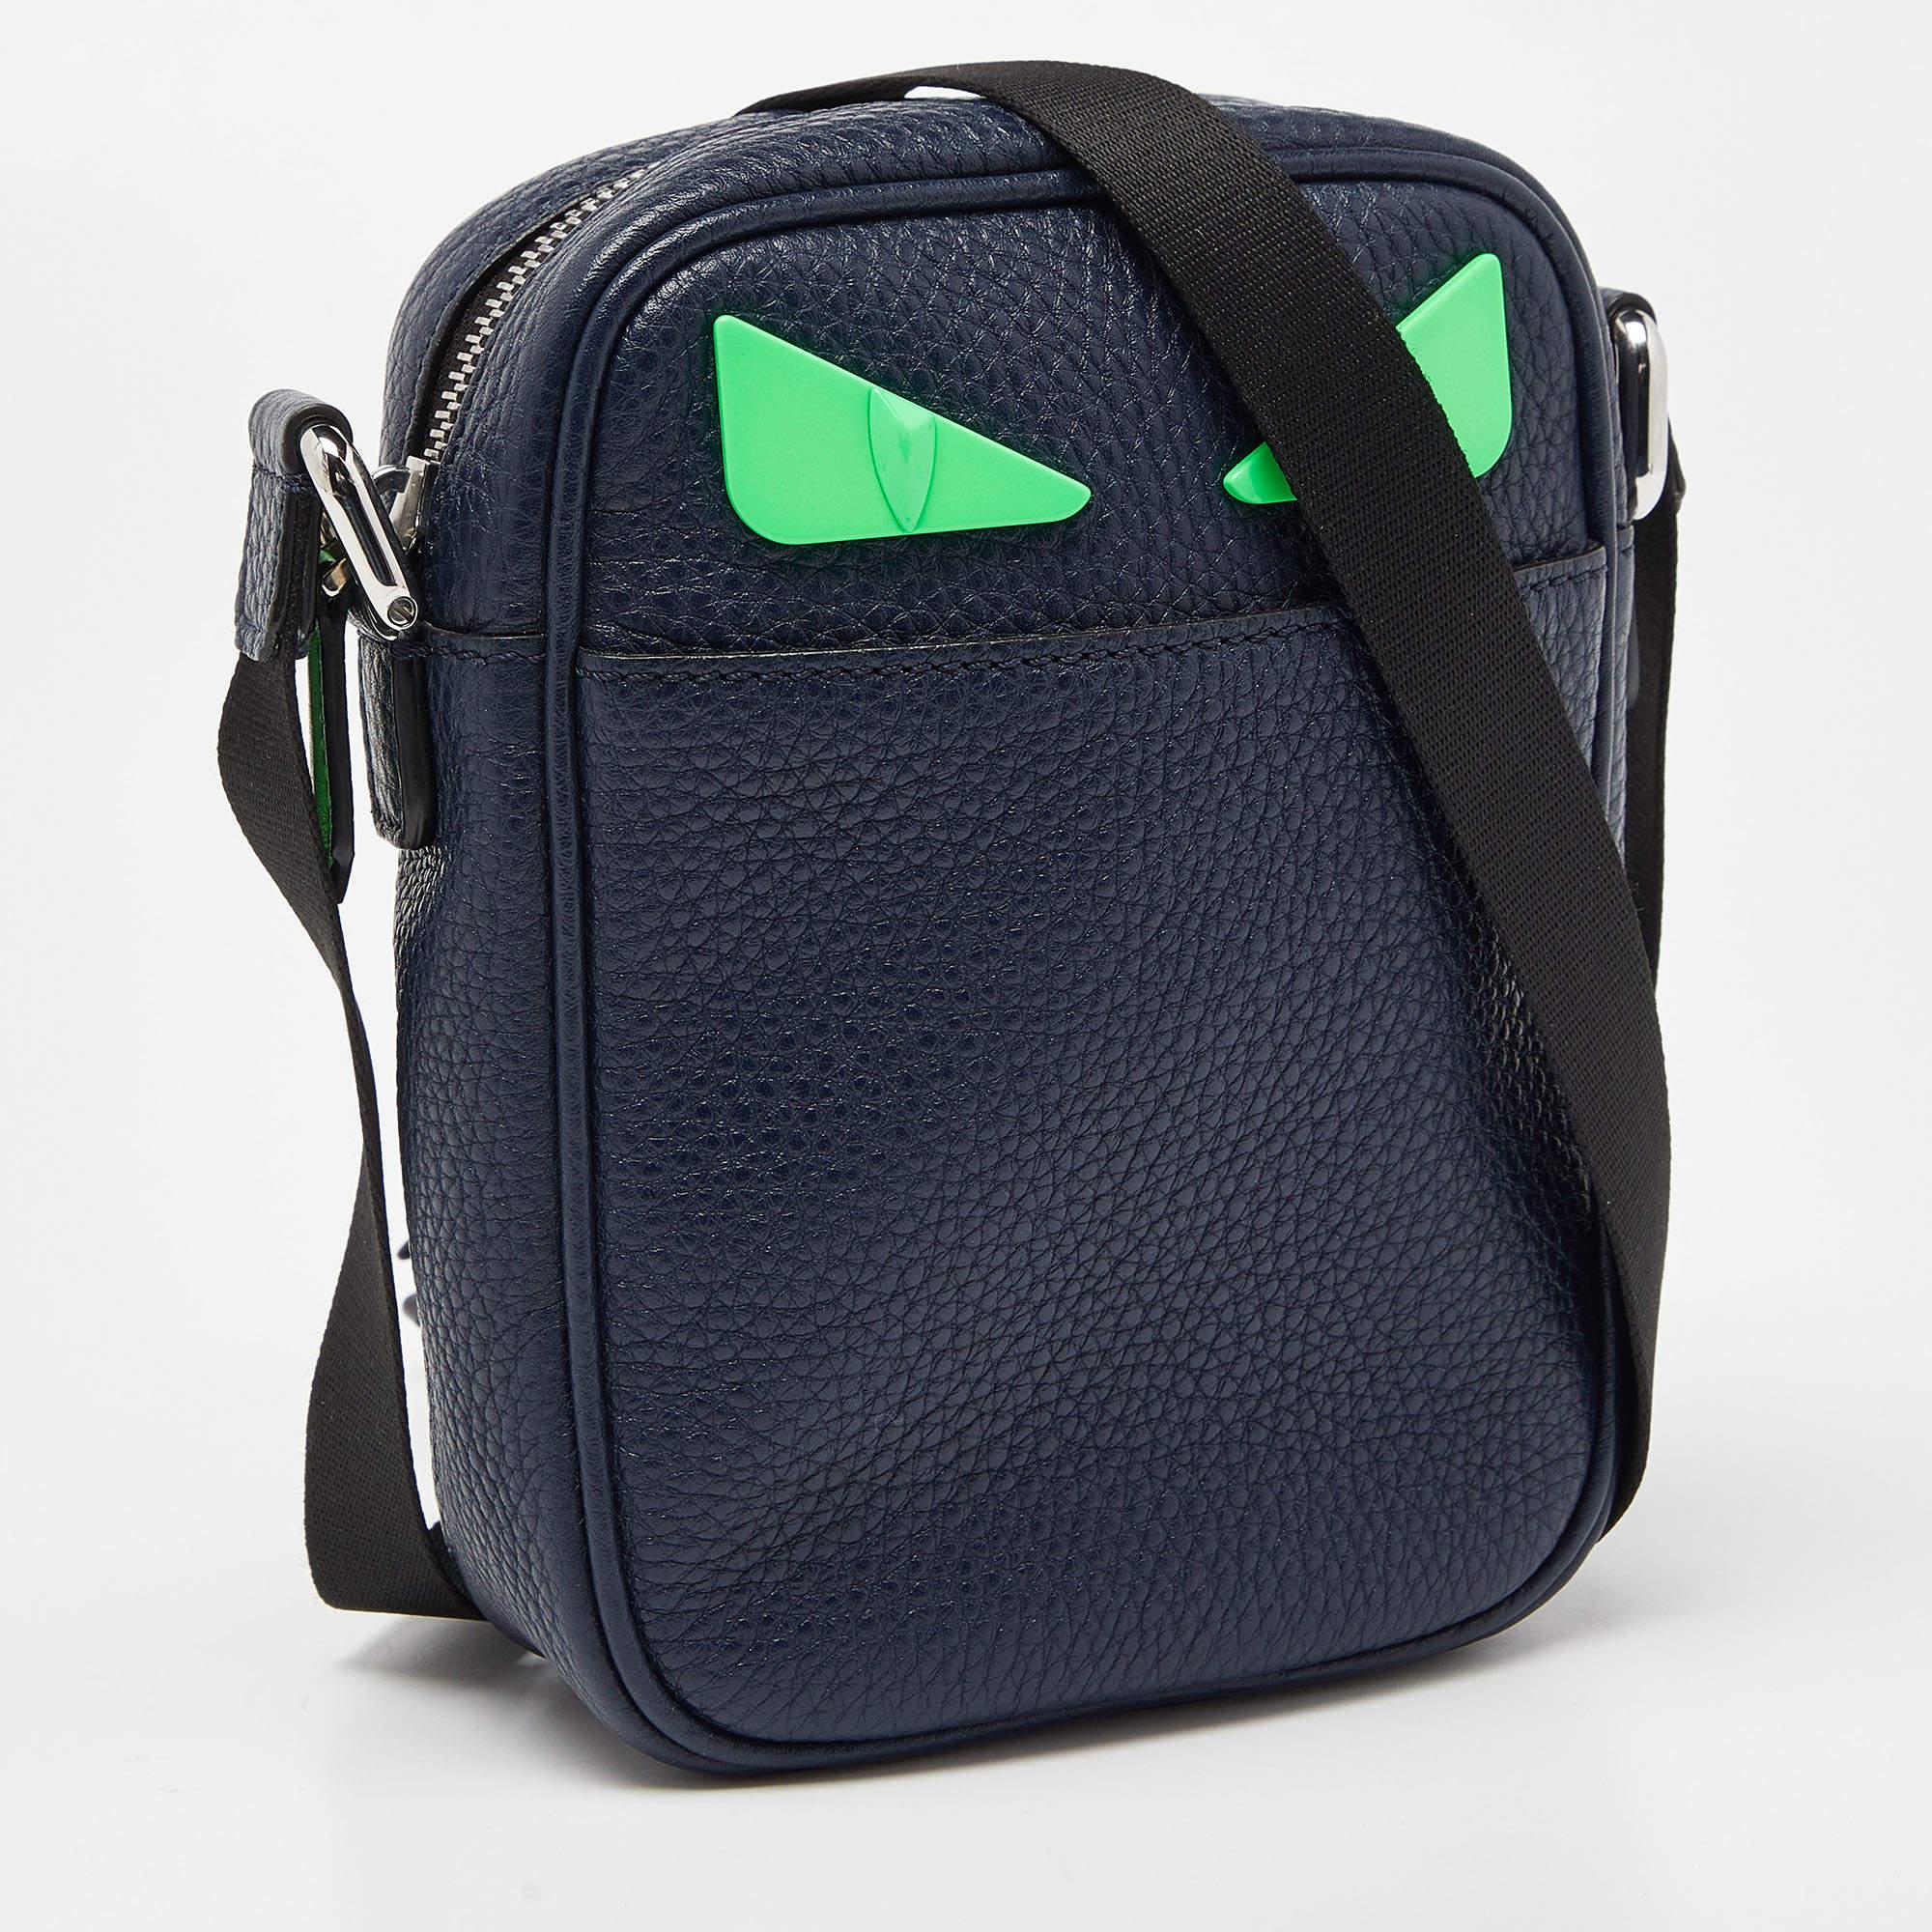 The Fendi bag is a stylish and playful accessory. Crafted from luxurious blue leather, it features Fendi's iconic monster eyes design with vibrant hue detailing. The compact crossbody design makes it perfect for on-the-go people, while the